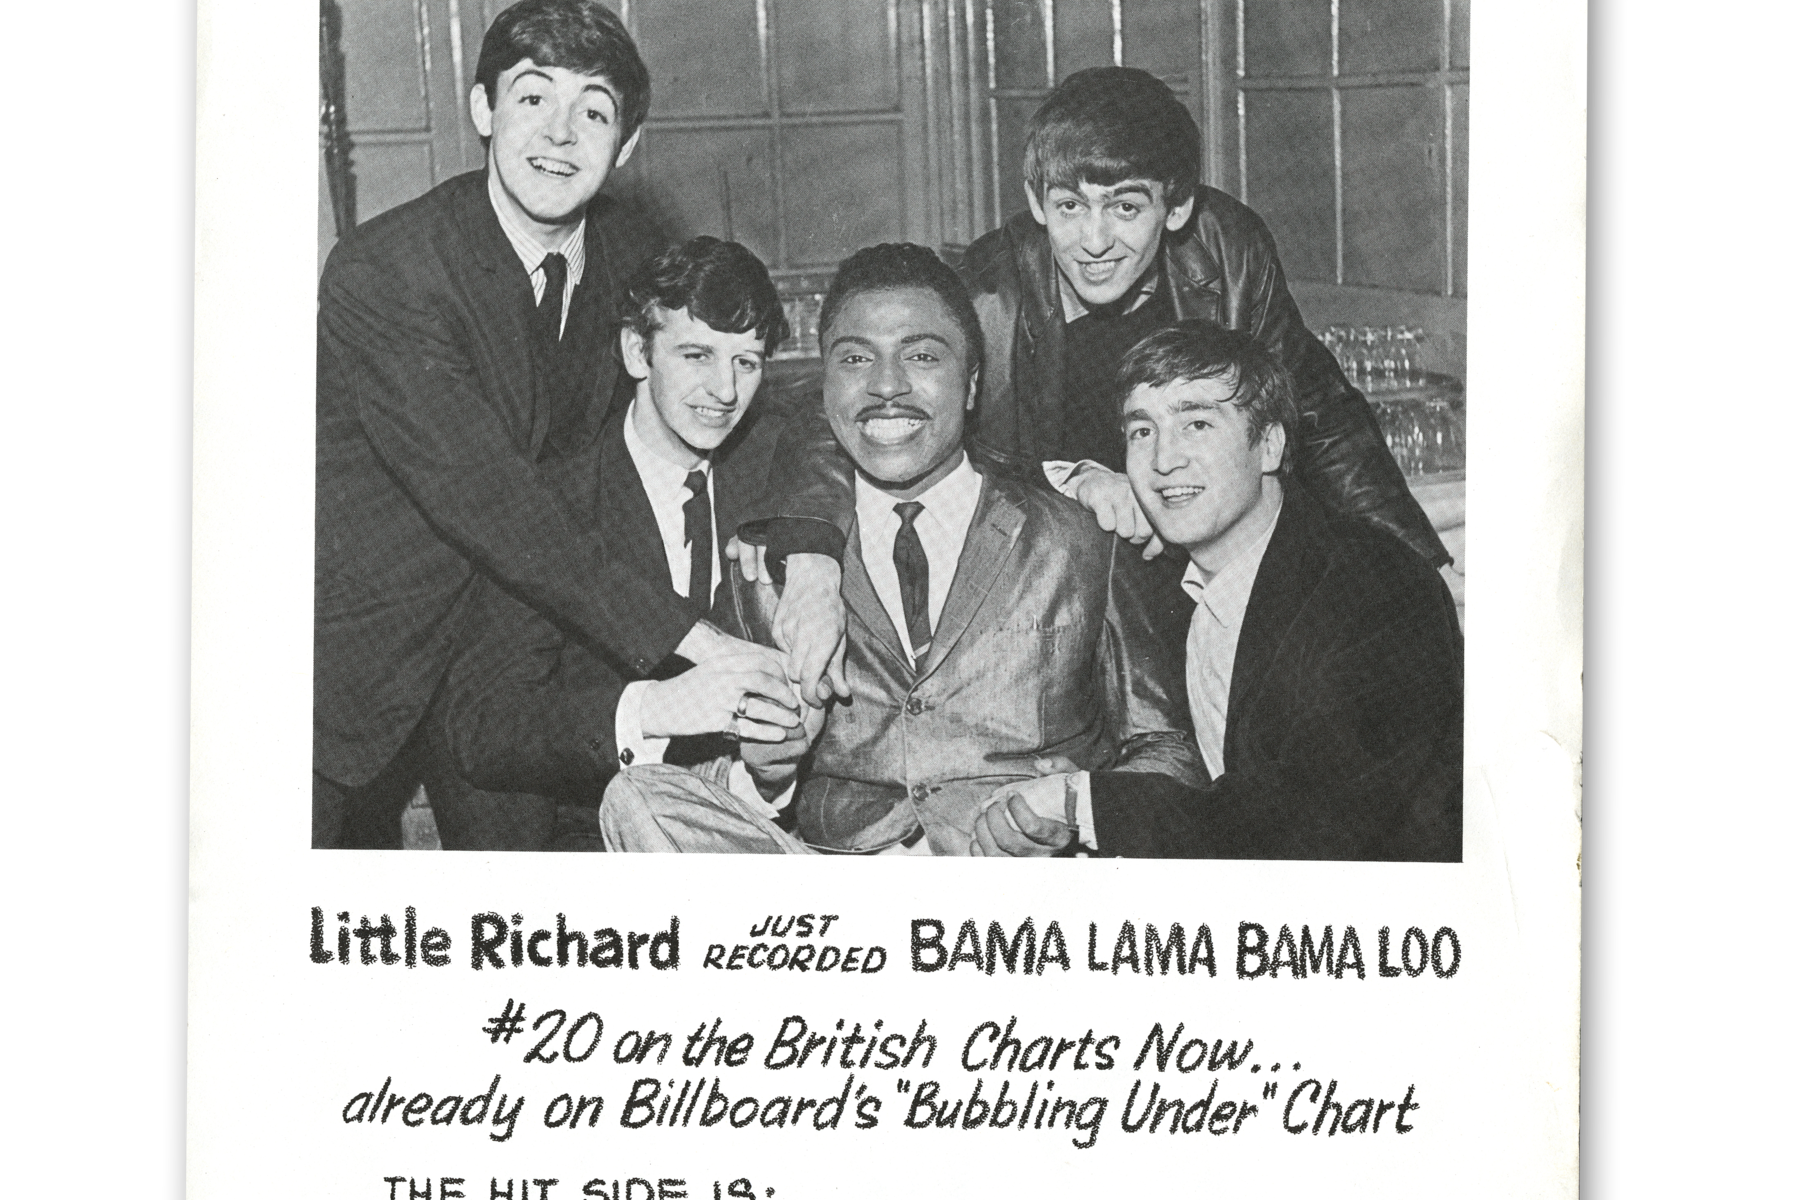 Little Richard with the Beatles